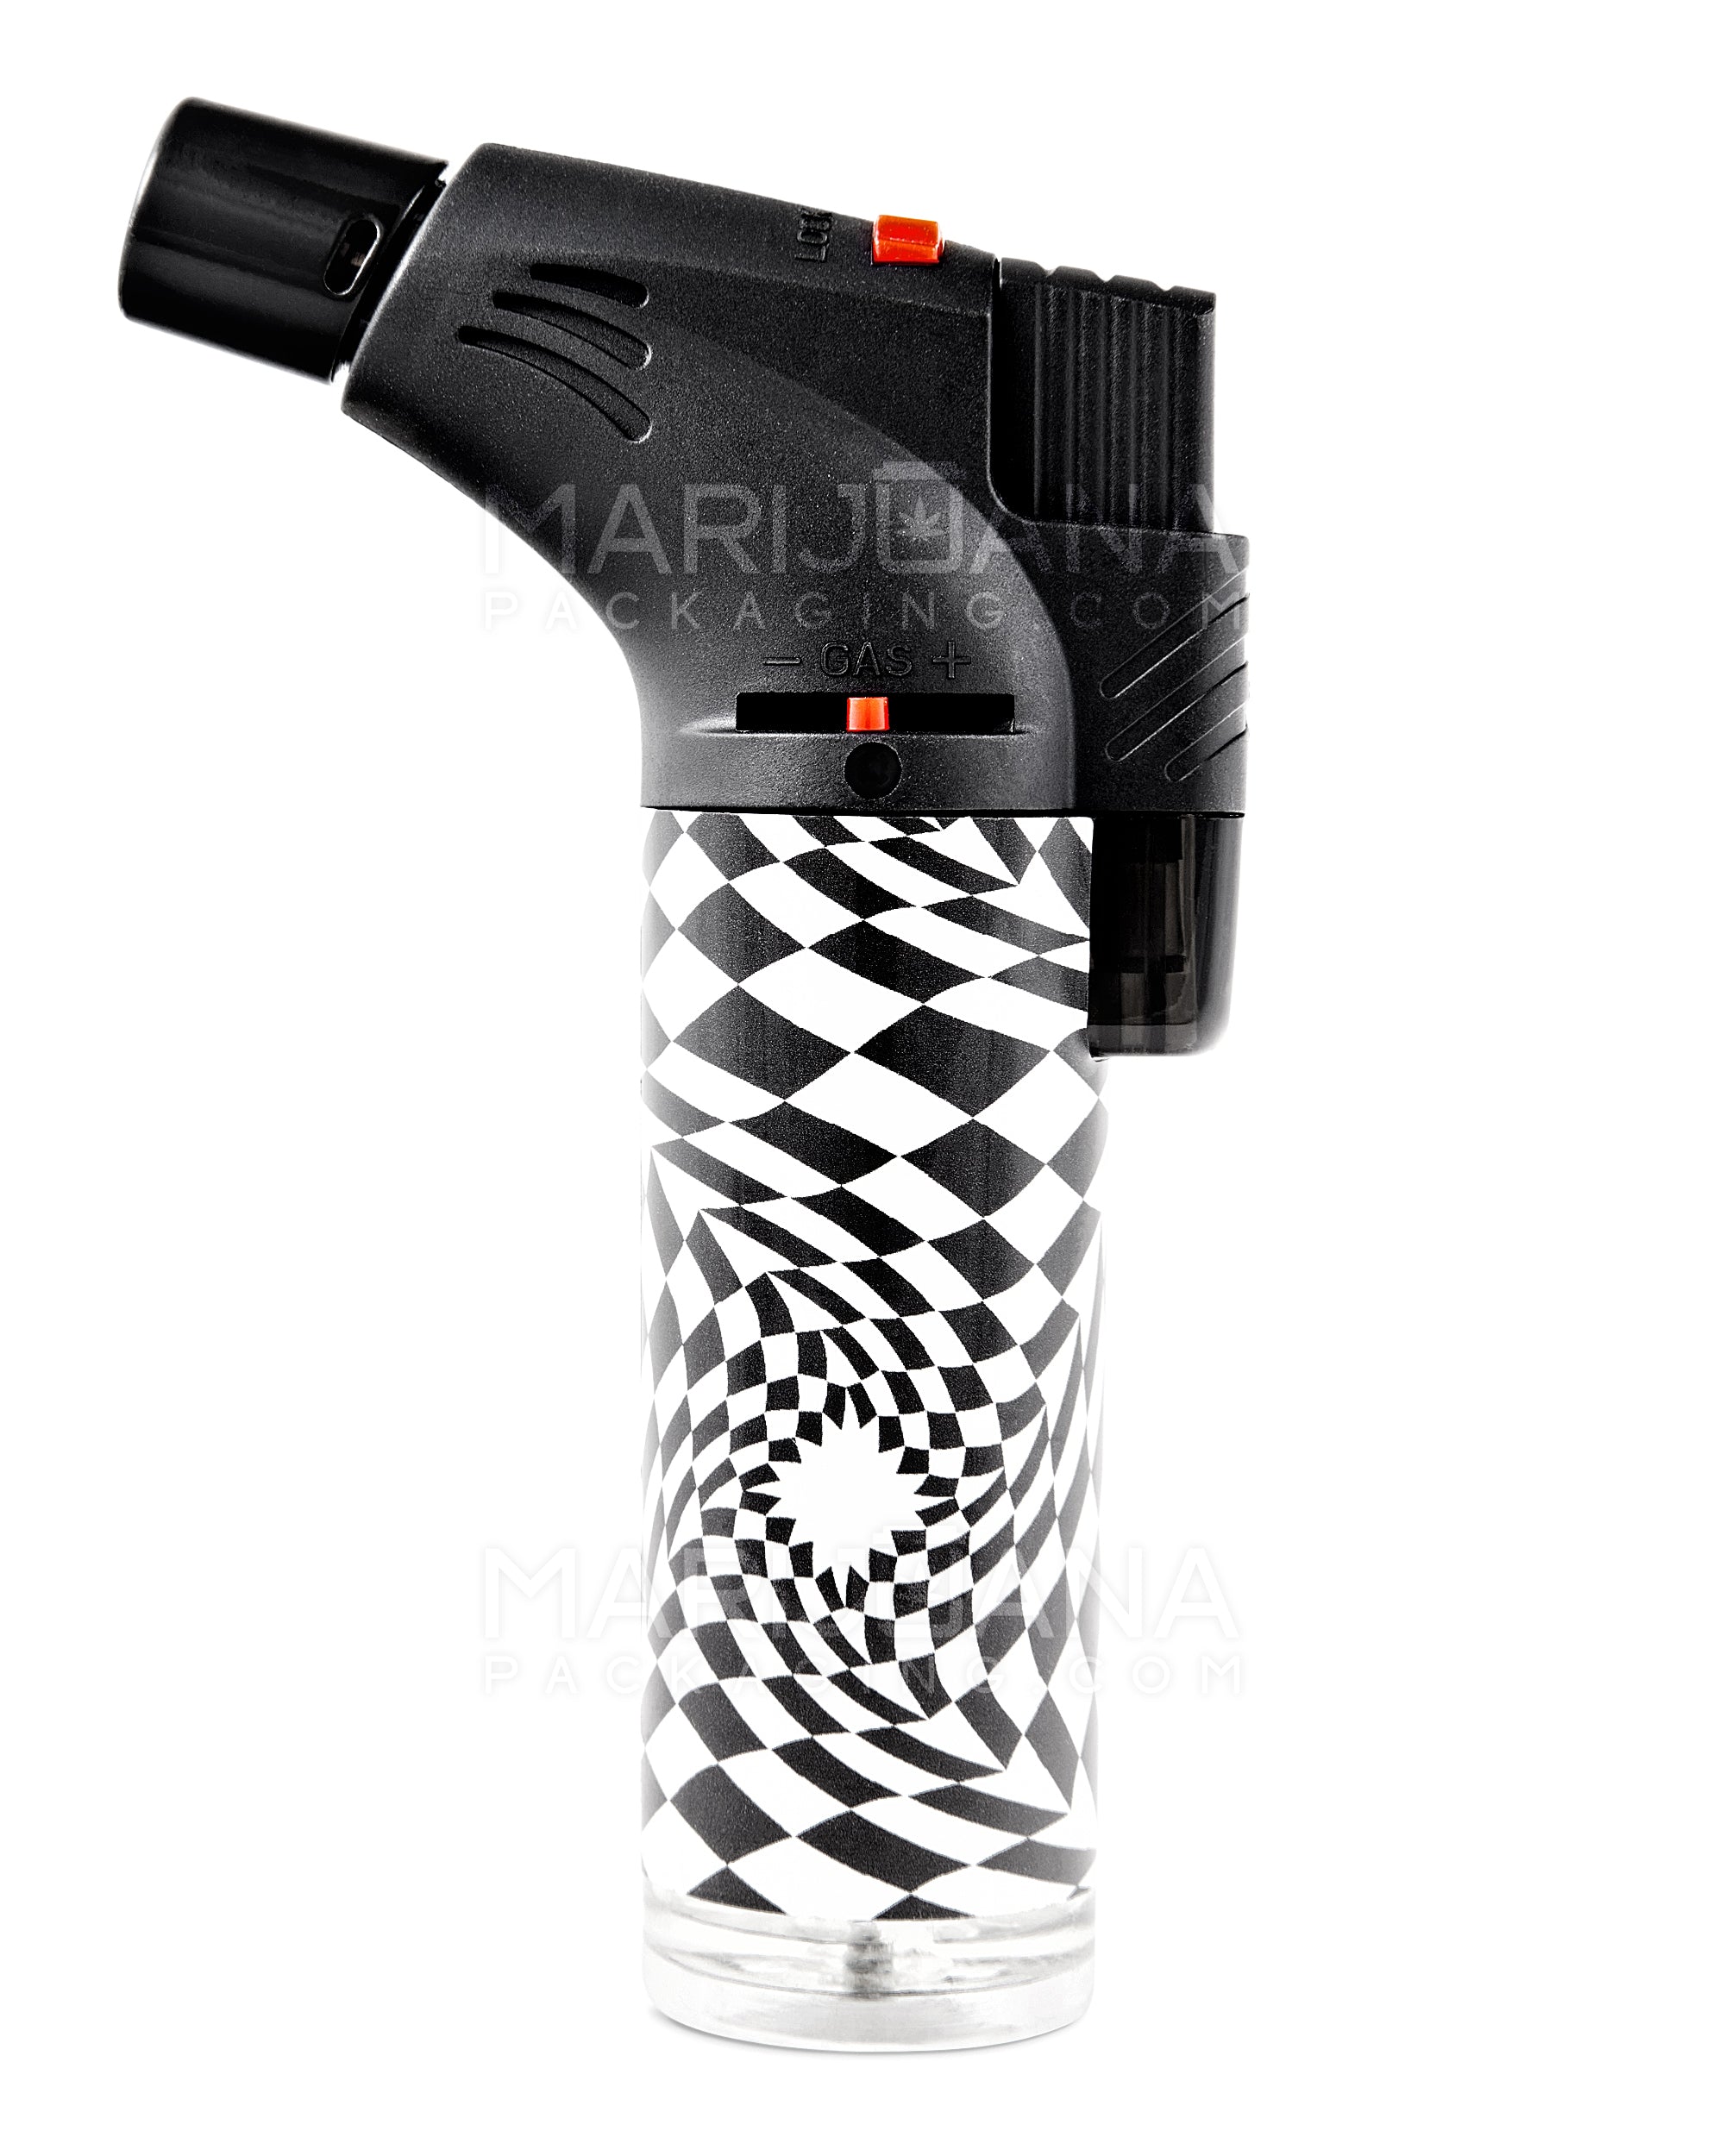 Psychedelic Design Plastic Torch w/ Safety Lock | 4.5in Tall - Butane - Assorted - 14